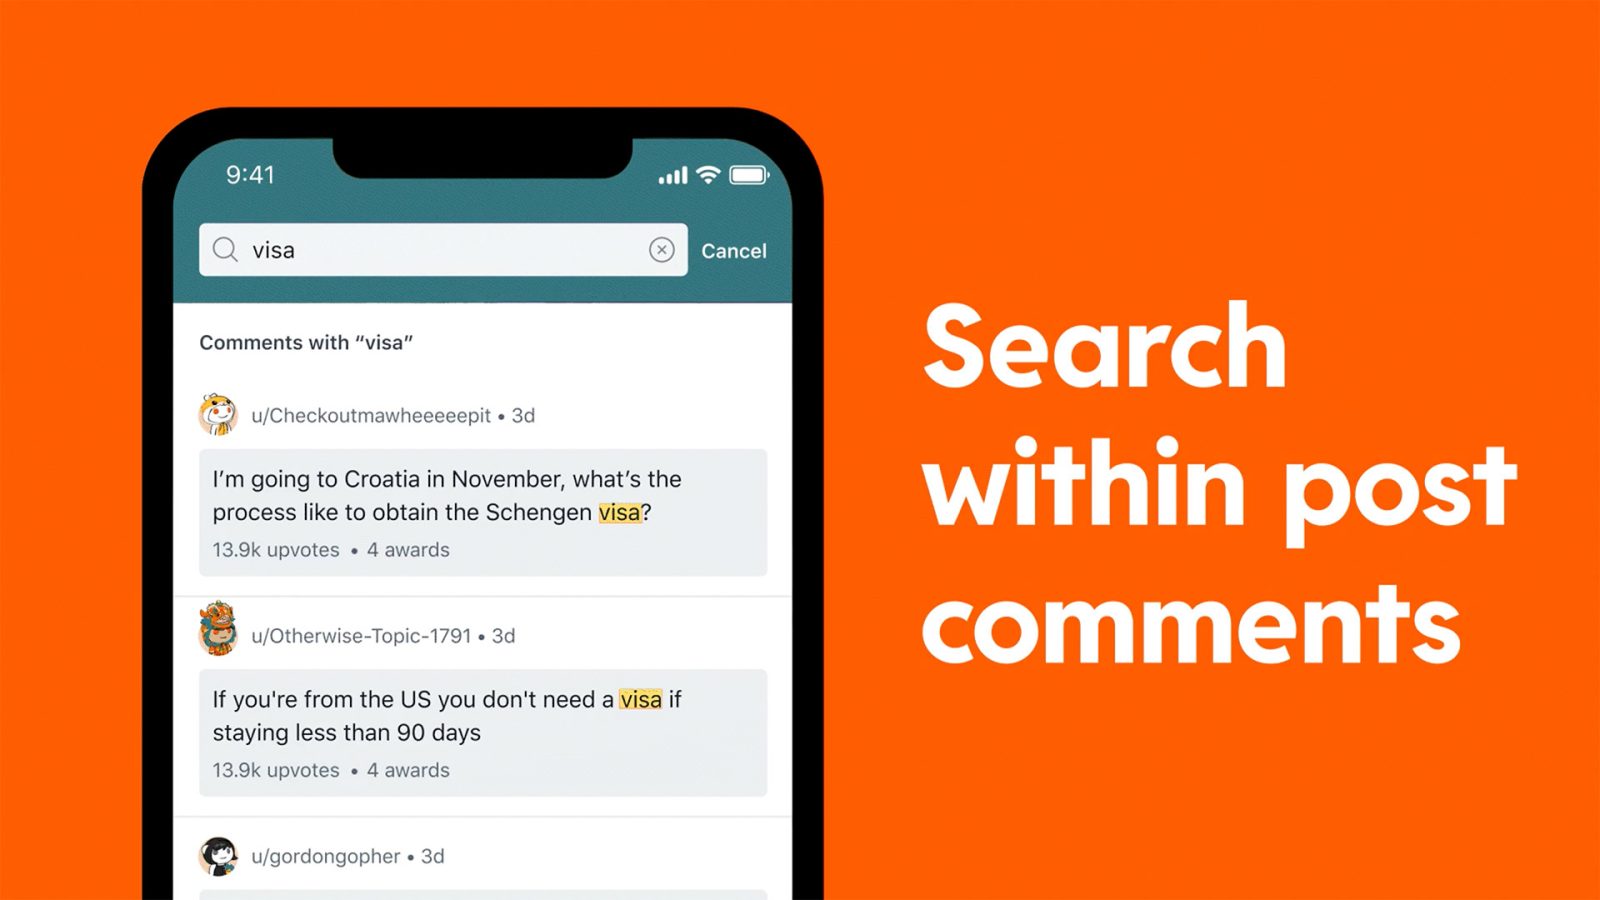 Reddit now lets users search for comments within posts on its app and website